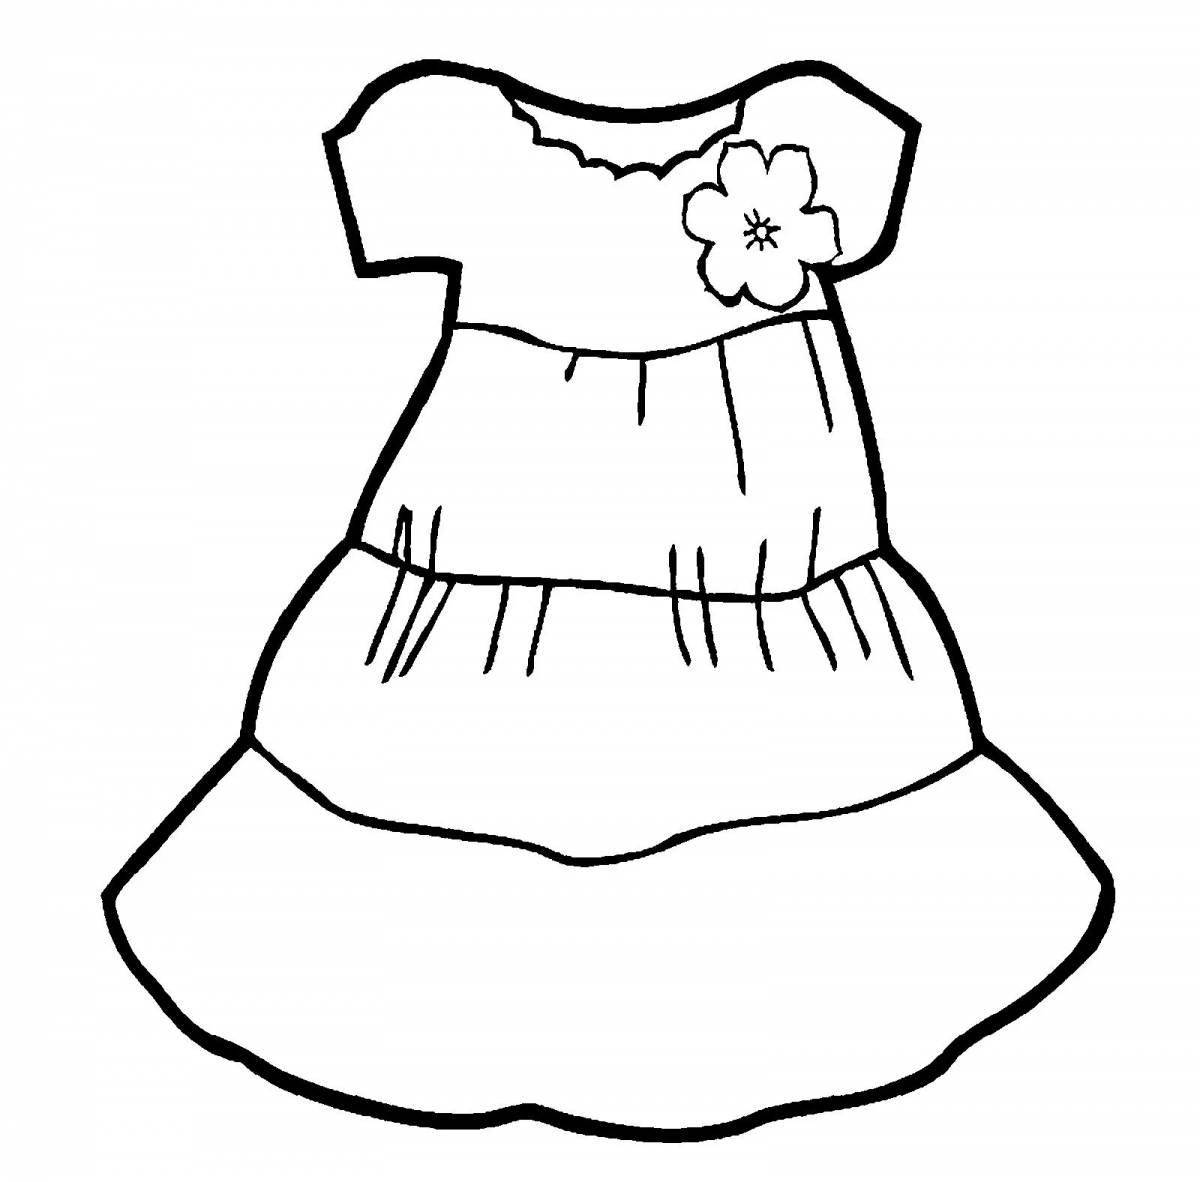 Colorful dress coloring book for dolls